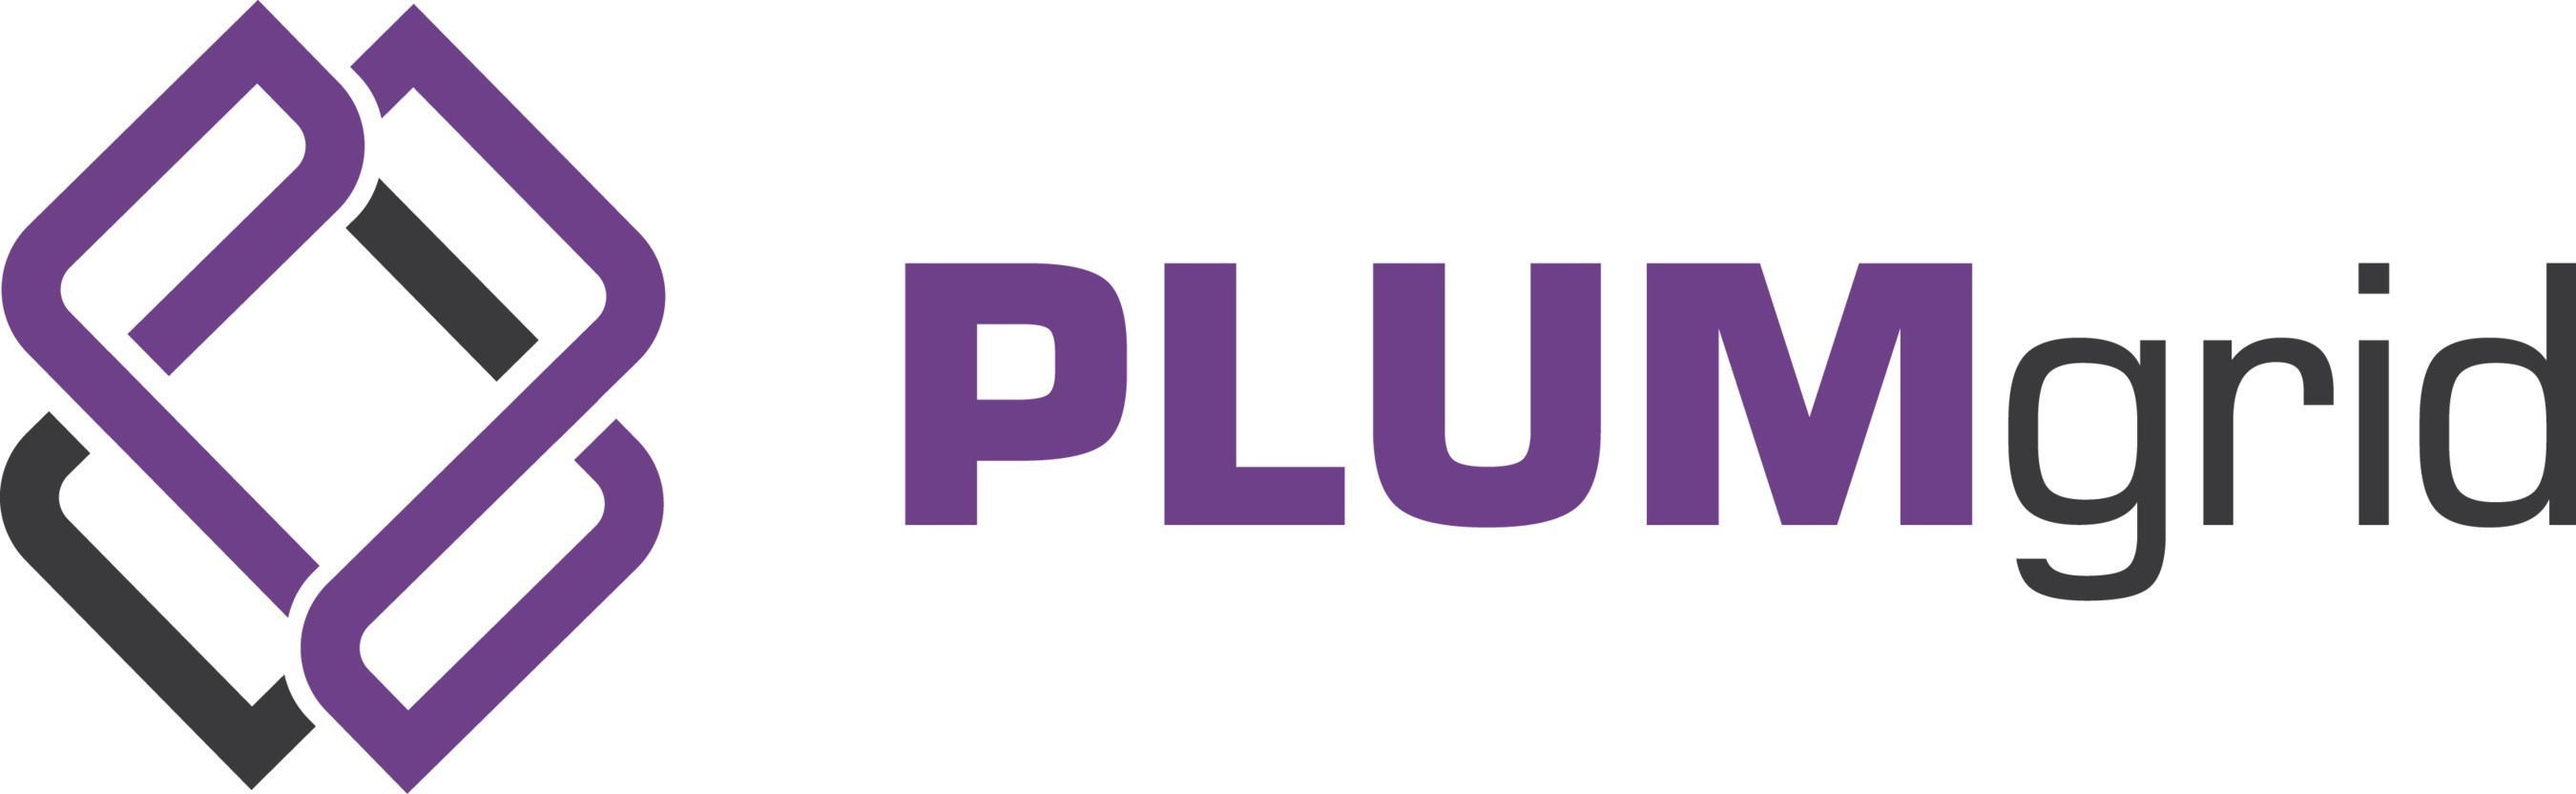 PLUMgrid is a leading innovator of virtual network infrastructure for OpenStack clouds.